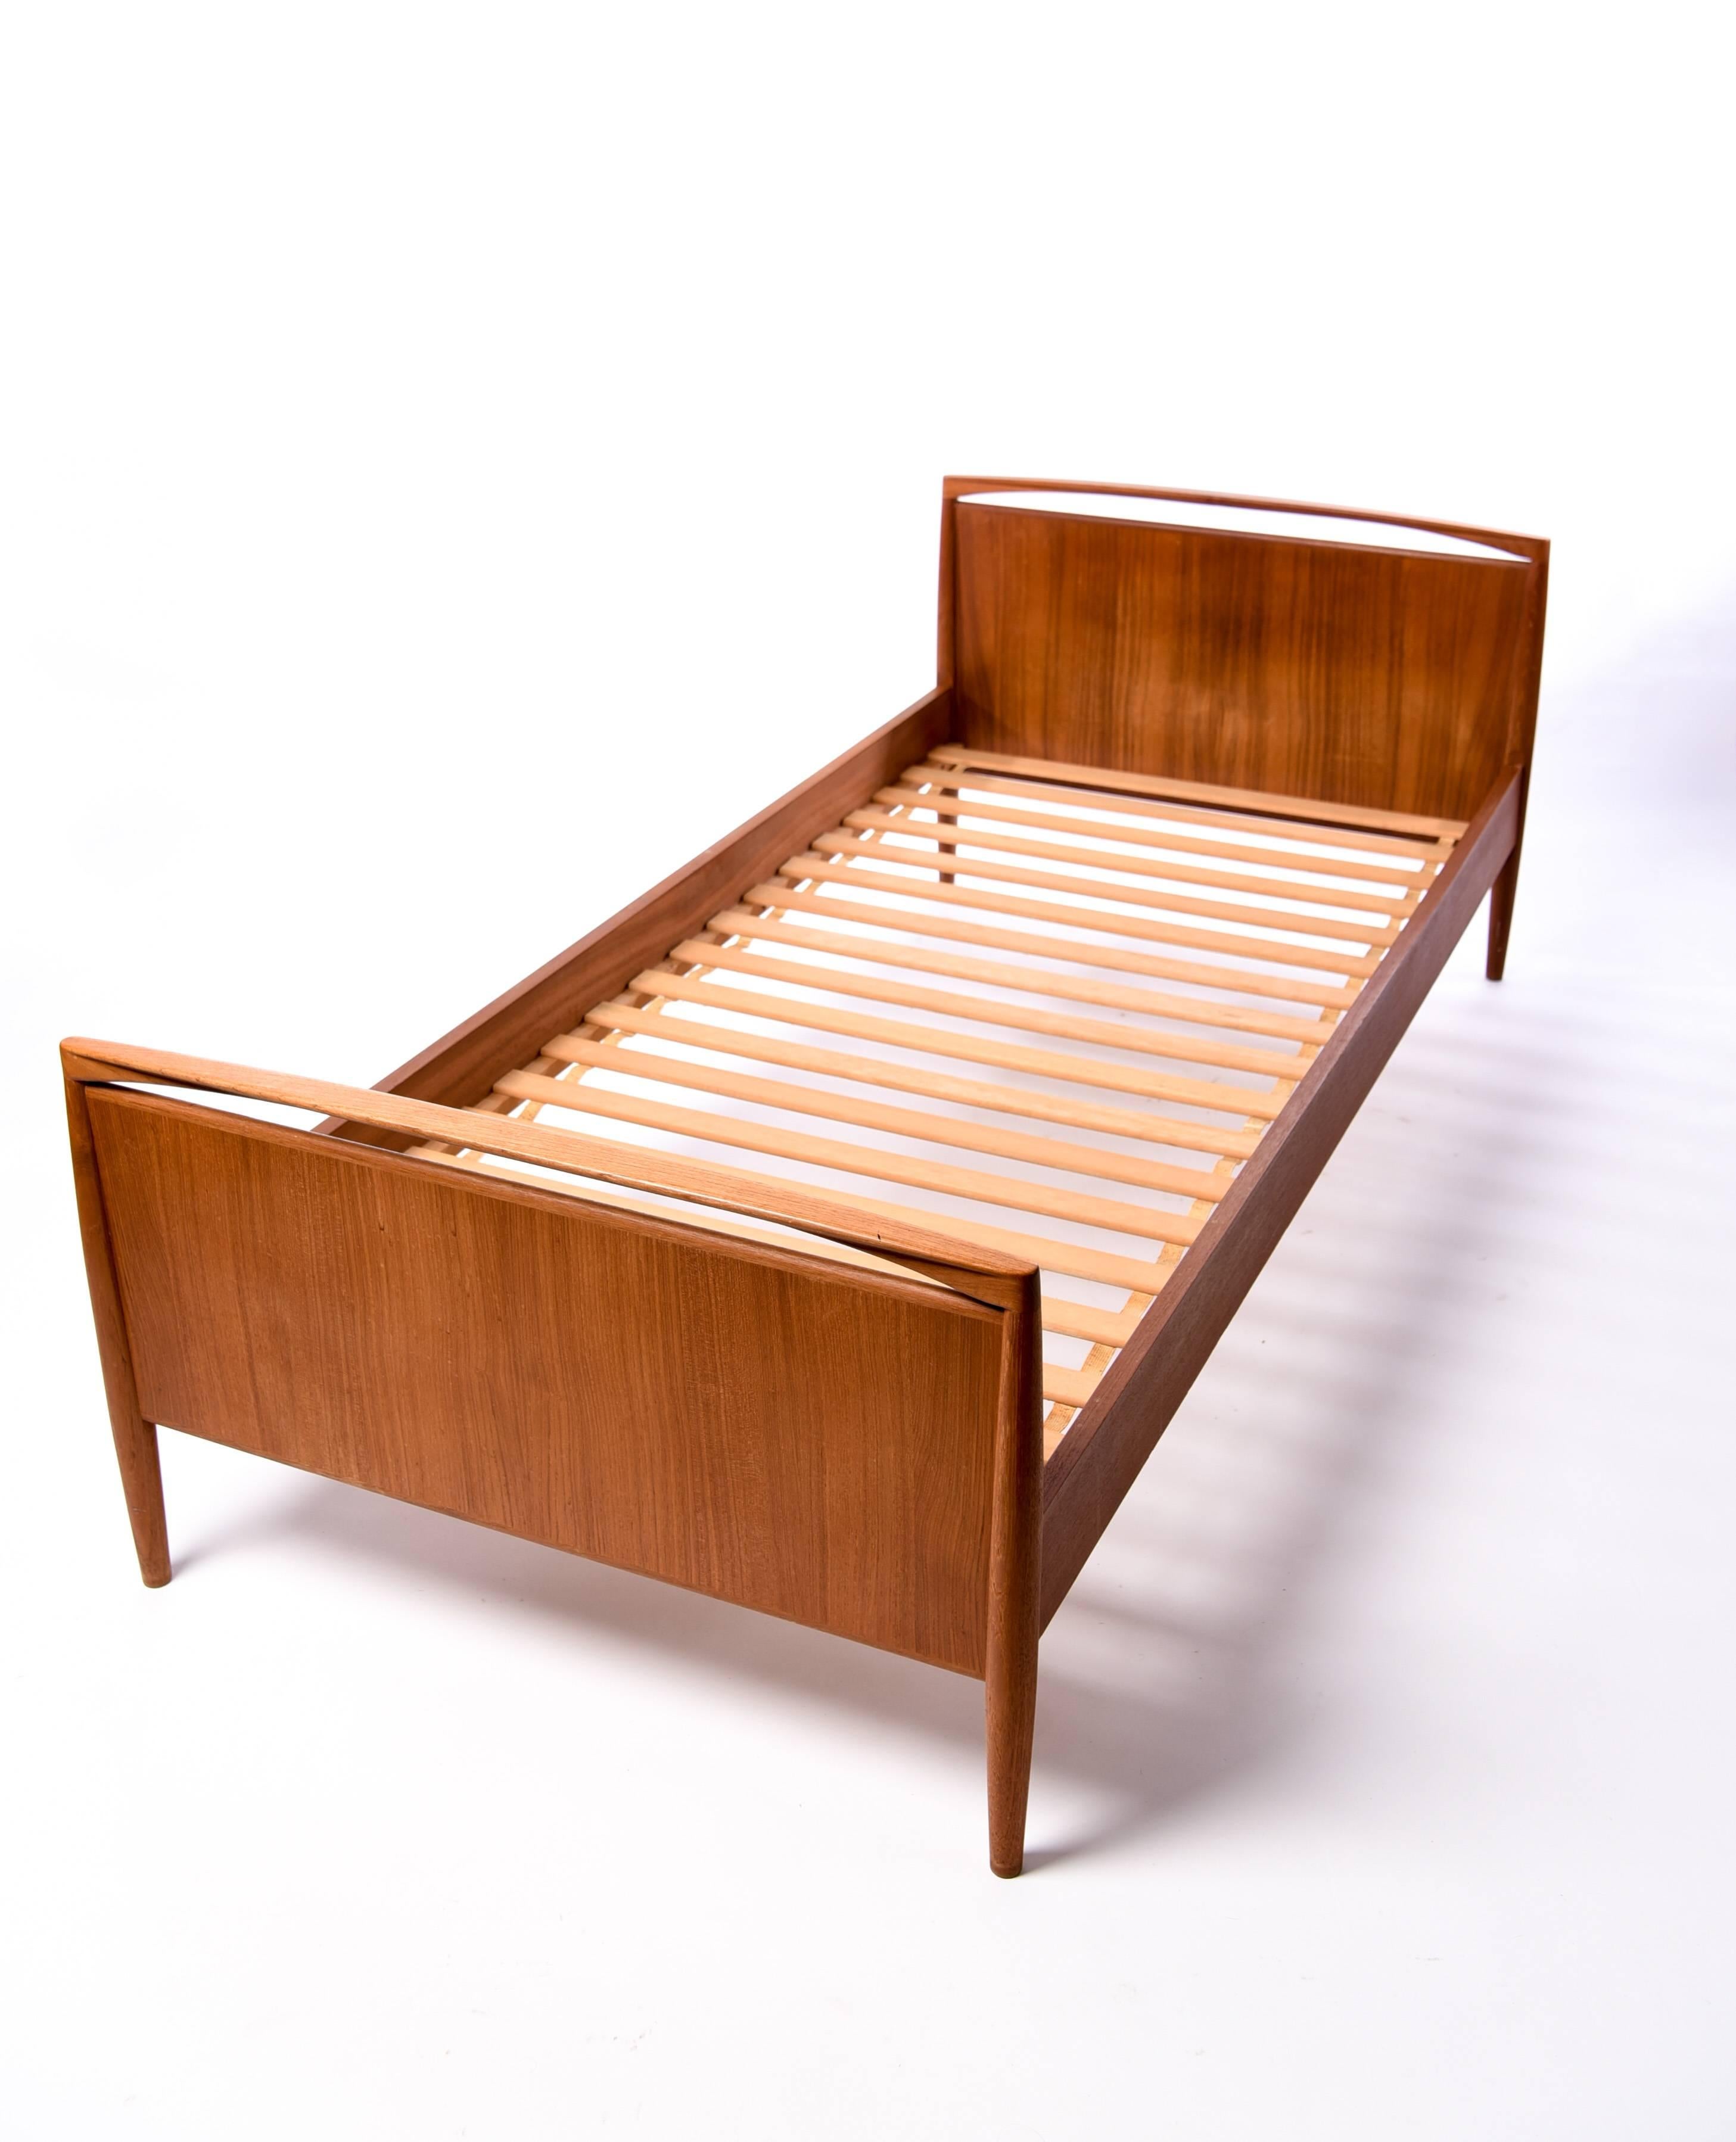 Relax in style on this sleek Danish midcentury daybed by iconic designer Kai Kristiansen for manufacturer Magnus Olesen. Disassembles easily for transportation.